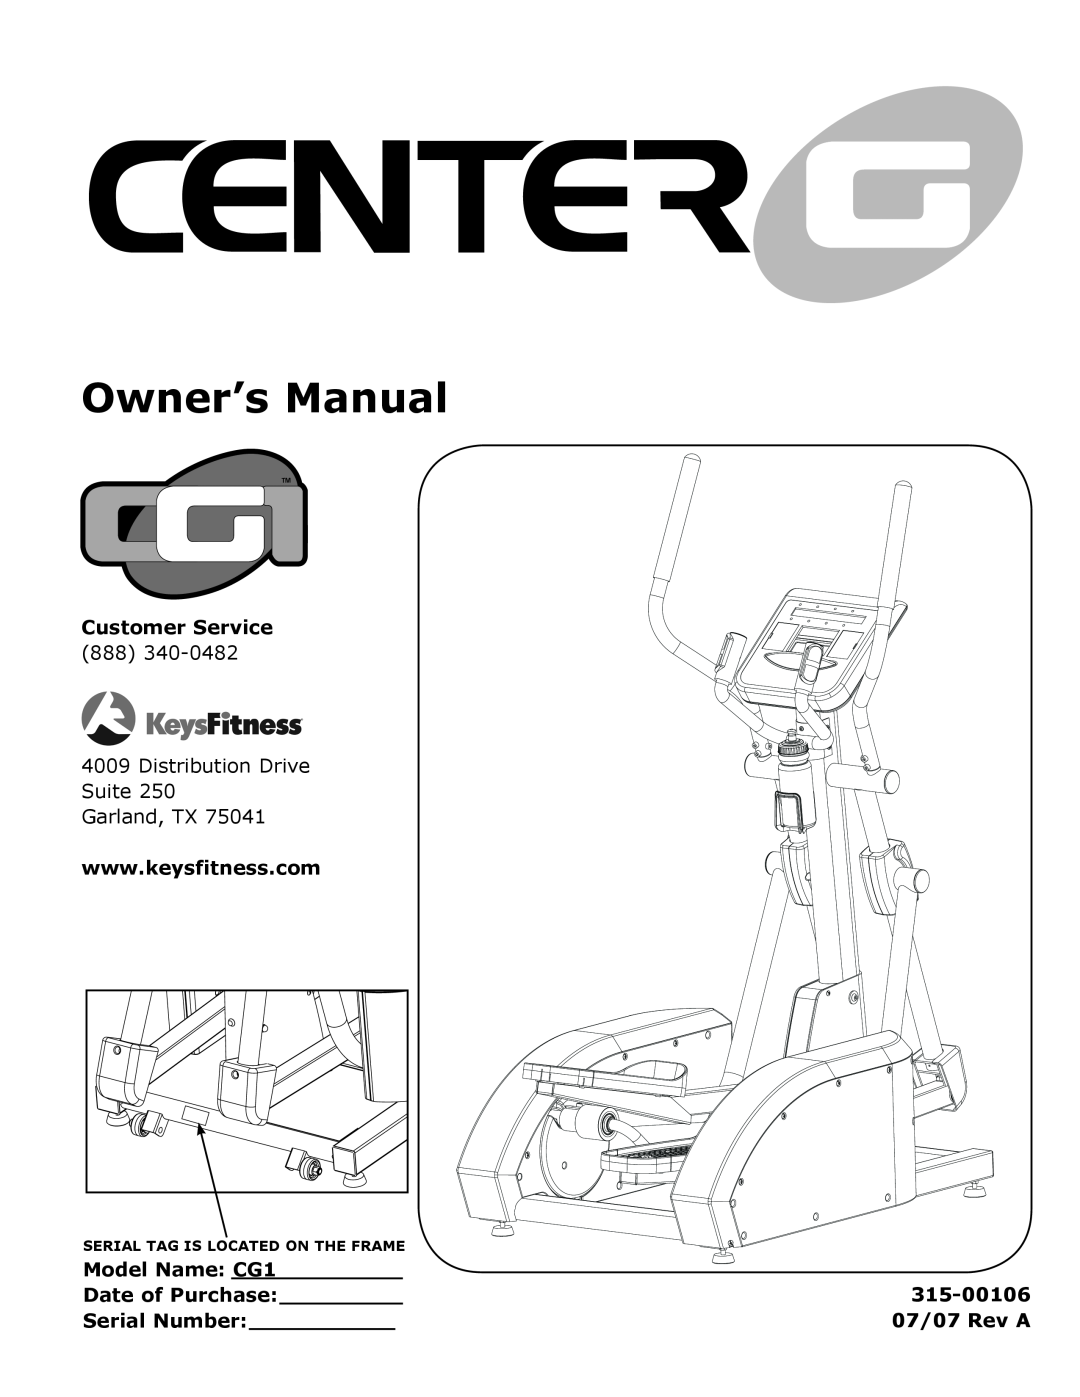 Keys Fitness 315-00106 owner manual Owner’s Manual, Customer Service 888, Model Name CG1 Date of Purchase Serial Number 